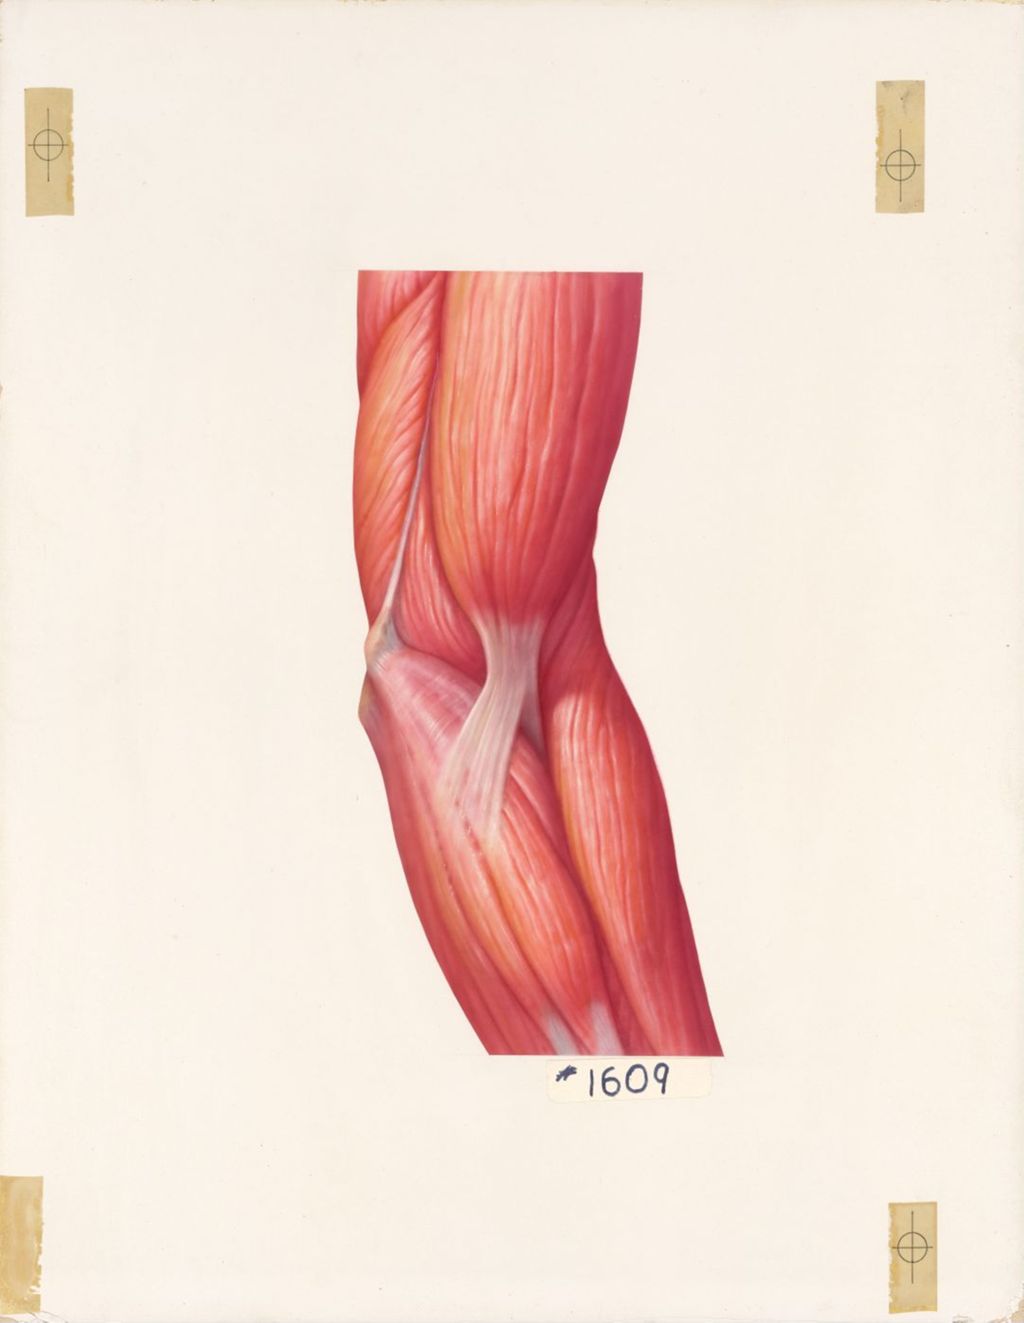 Miniature of The Elbow, The Musculature of the Elbow, Anteromedial Aspect